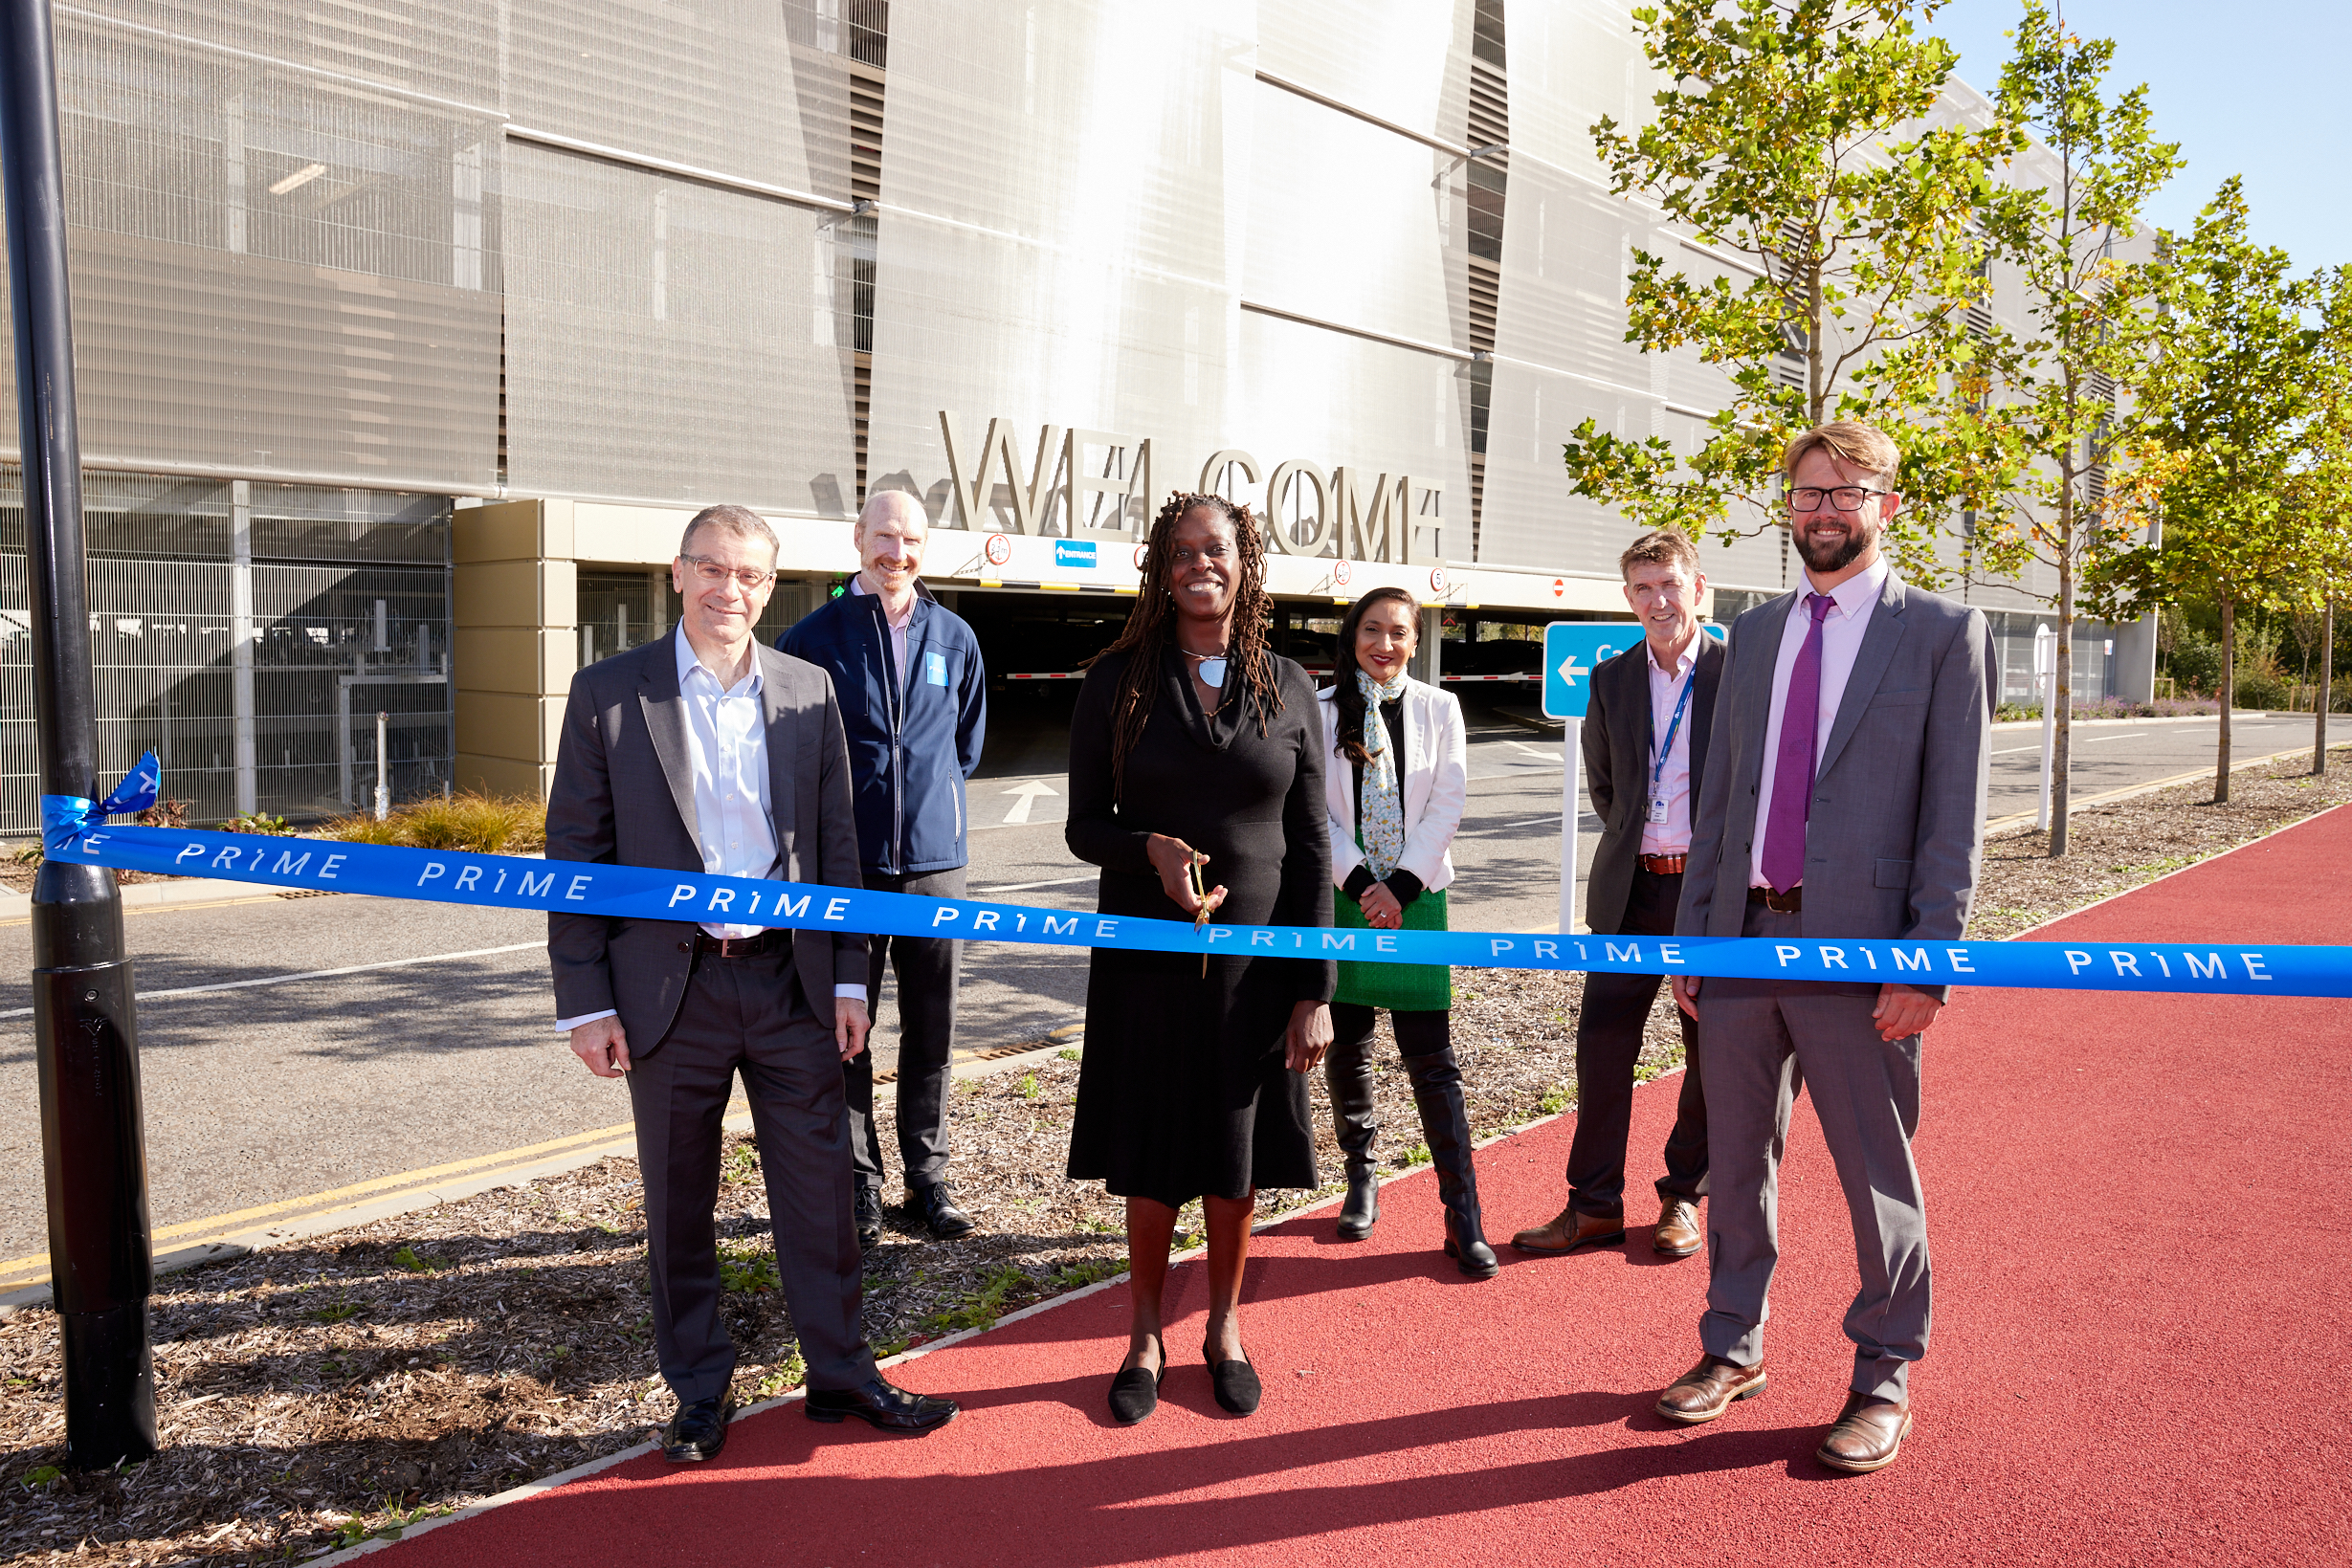 The new multi-storey park and ride facility at Adanac Health & Innovation Campus was officially opened for staff this week, in a short ceremony attended by UHS staff and key dignitaries from the city council, building developer company and contractors.